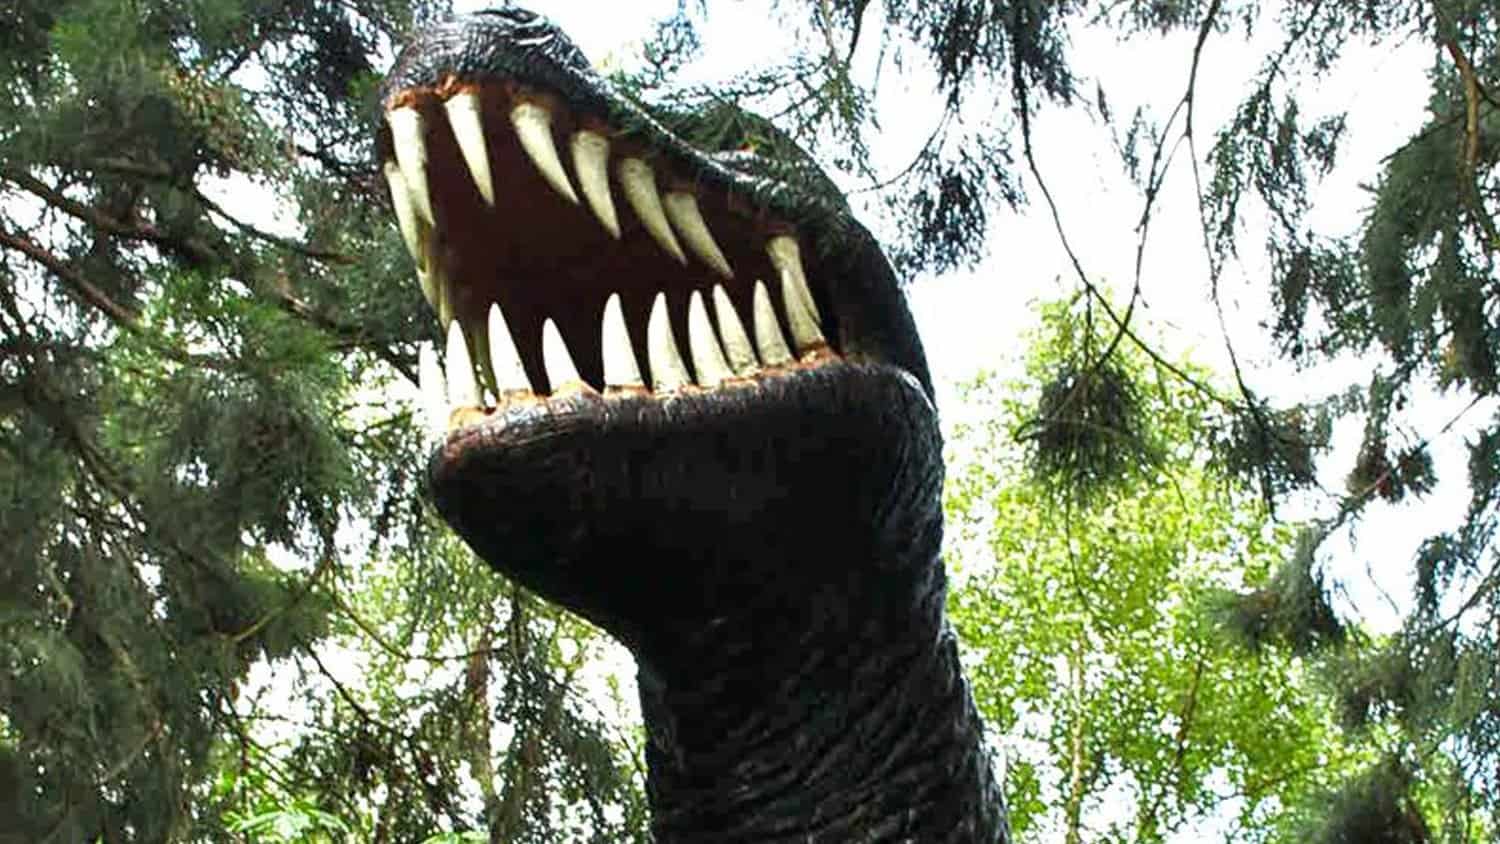 T-Rex Statue at Knebworth House